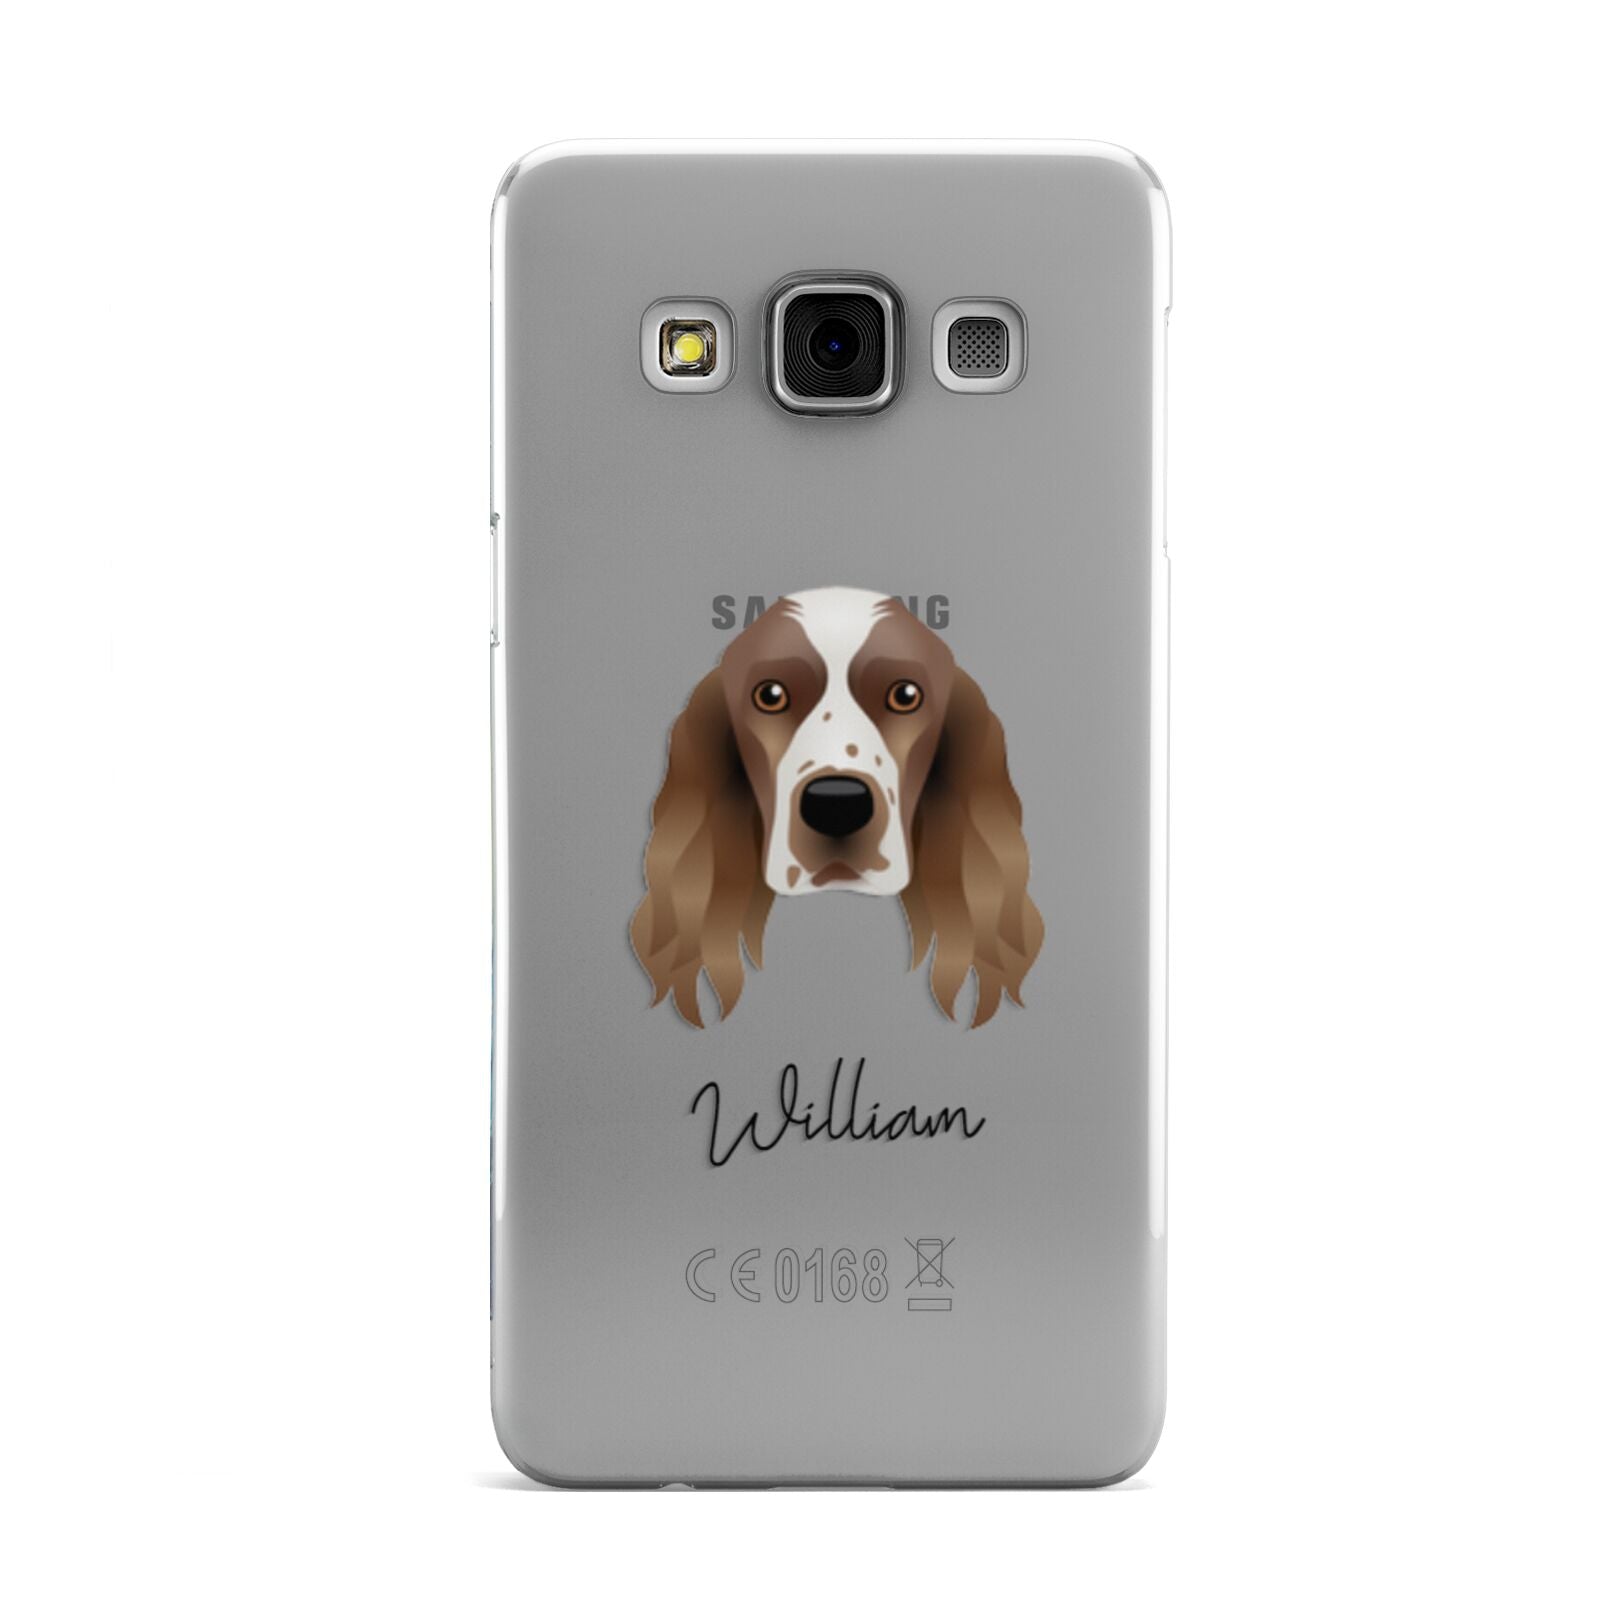 Welsh Springer Spaniel Personalised Samsung Galaxy A3 Case